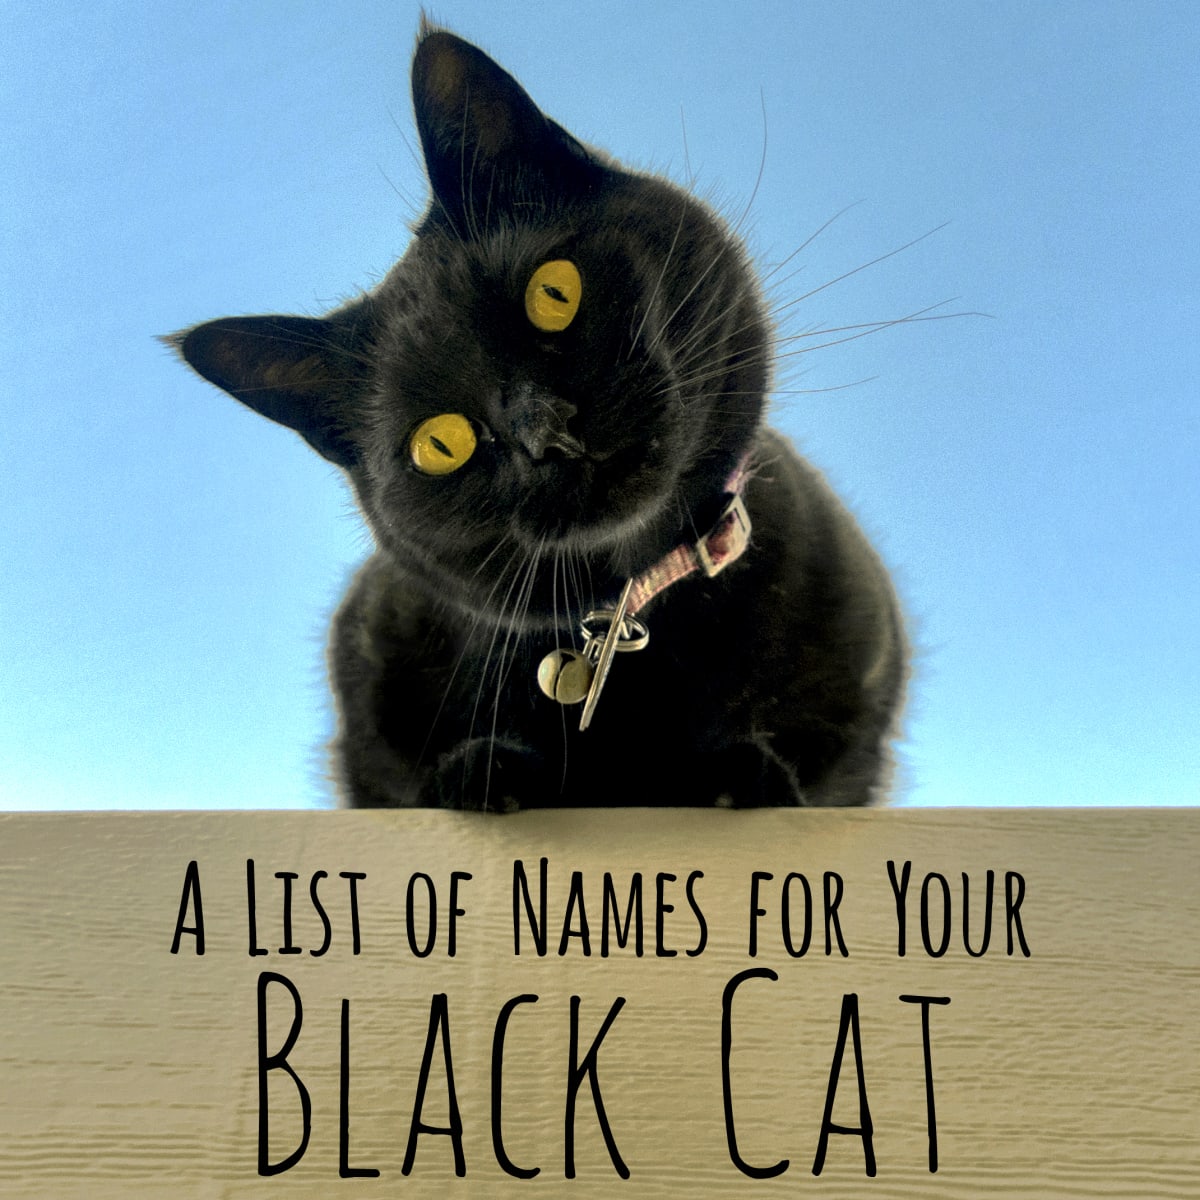 Cool Unique And Creative Names For Your Black Cat Pethelpful By Fellow Animal Lovers And Experts